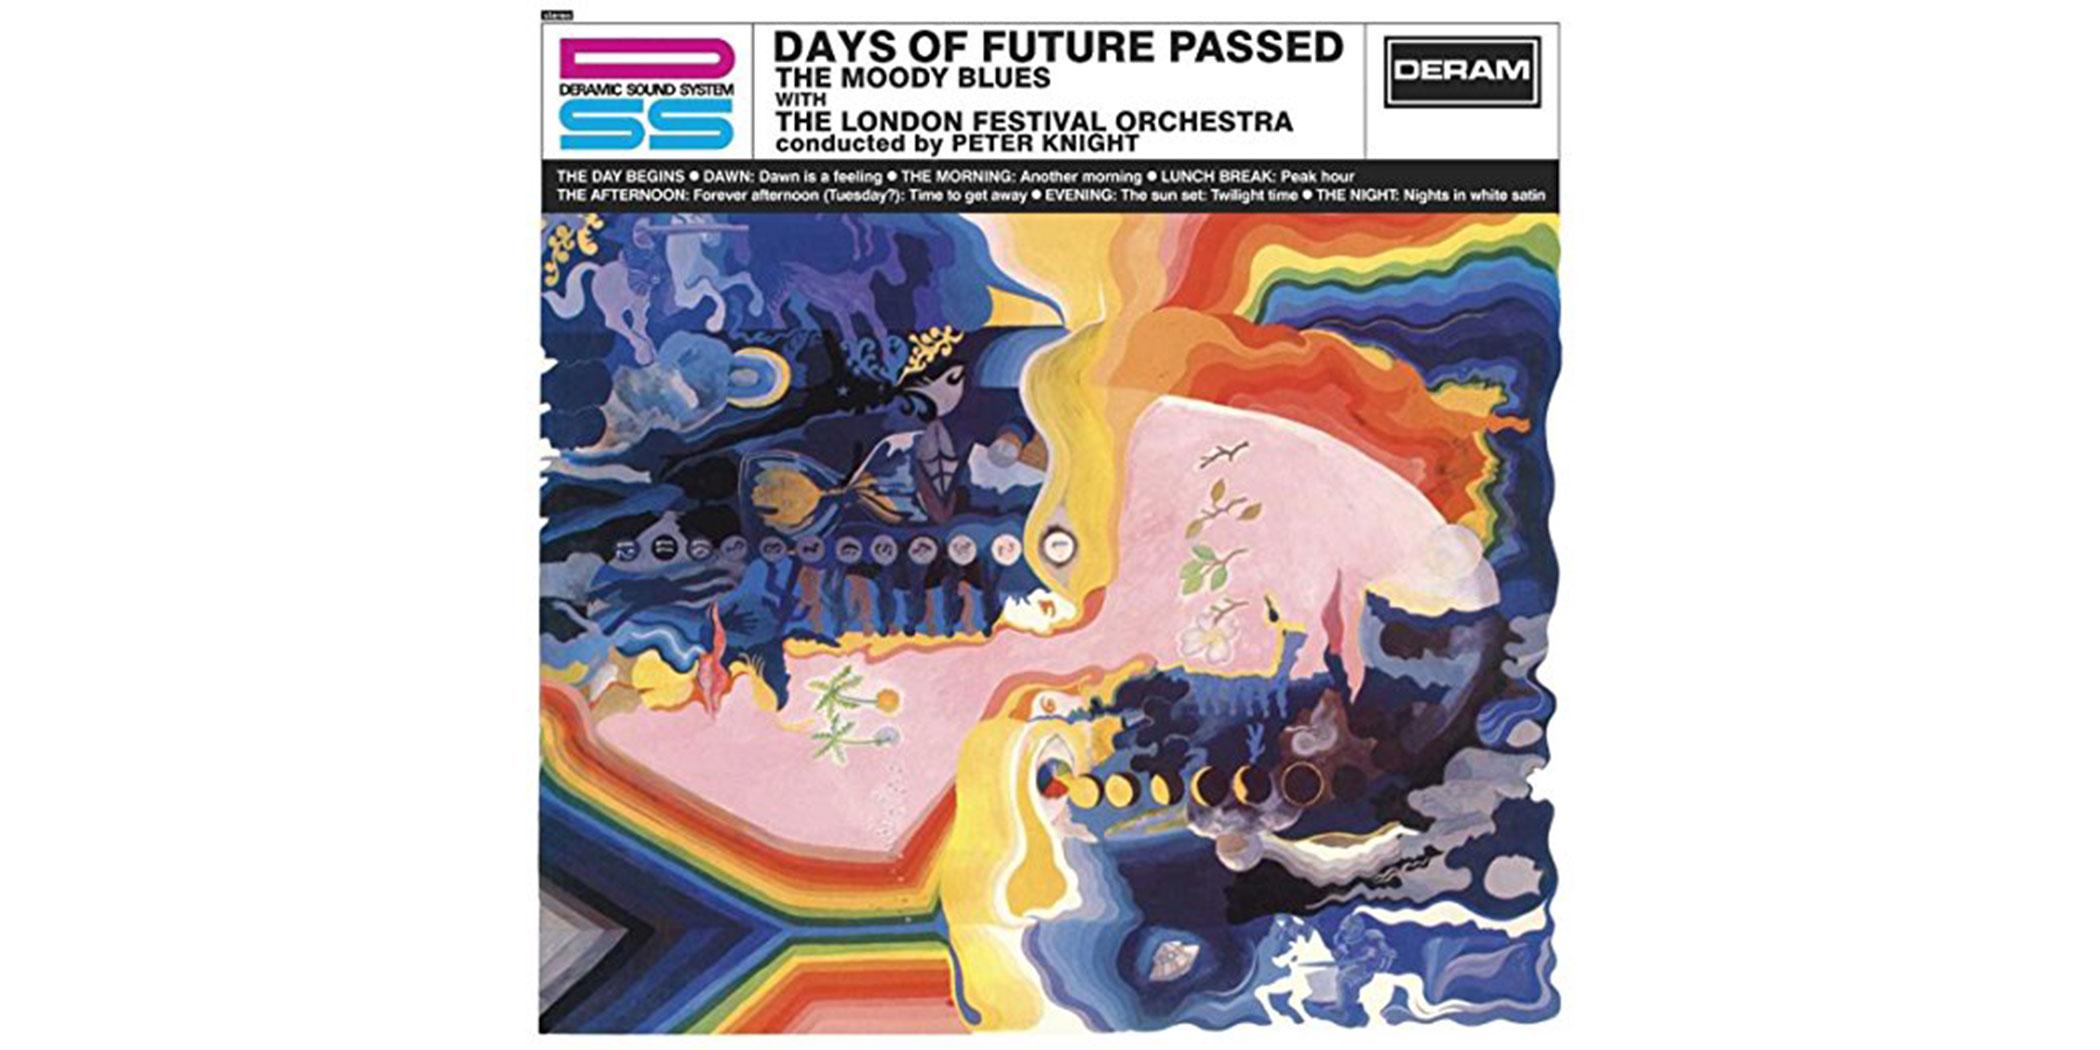 Days of Future Passed by the Moody Blues